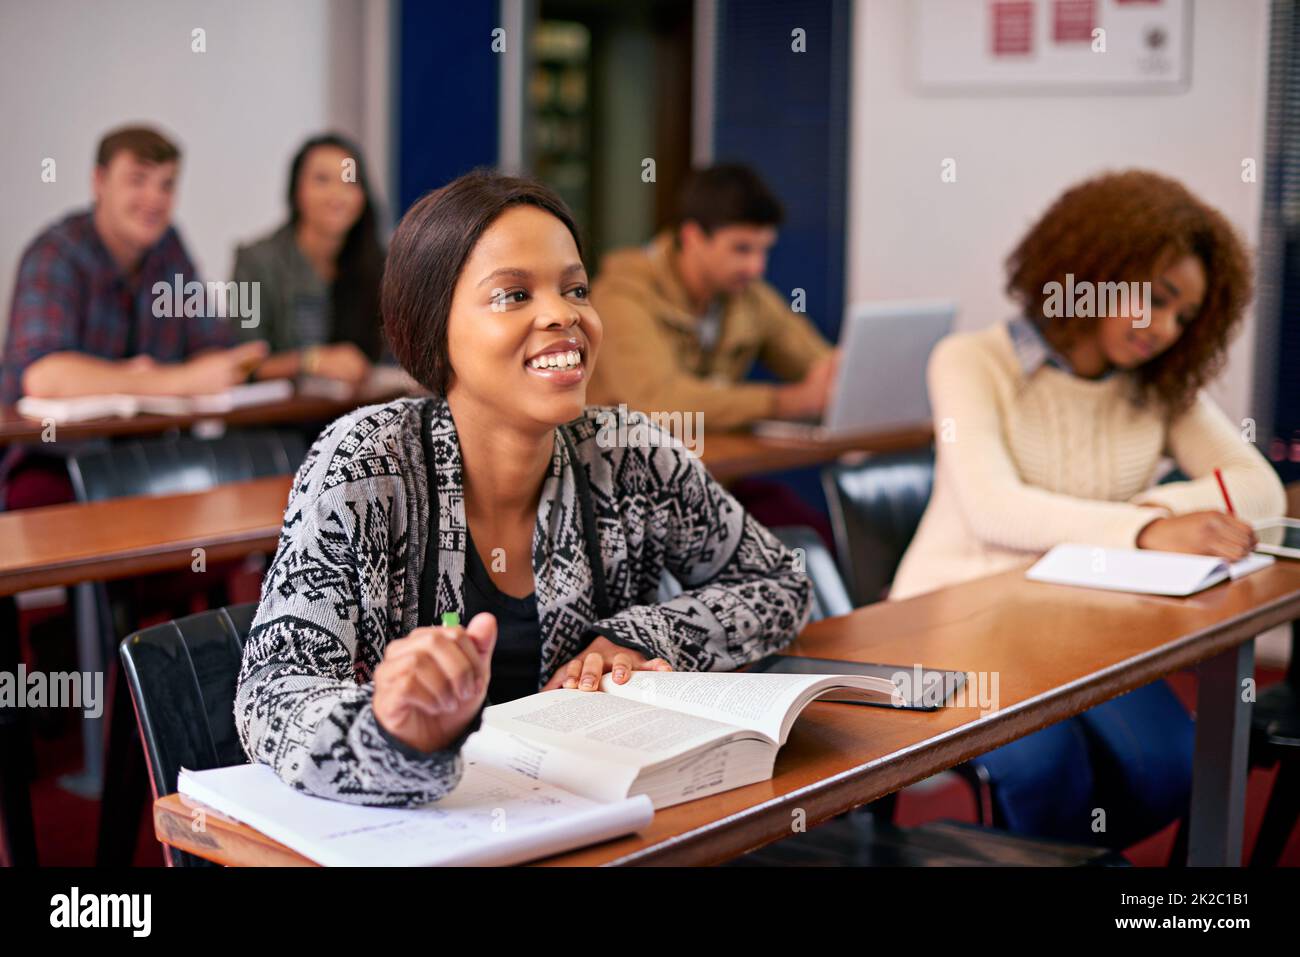 Furthering their education. Shot of a happy student paying attention in class. Stock Photo